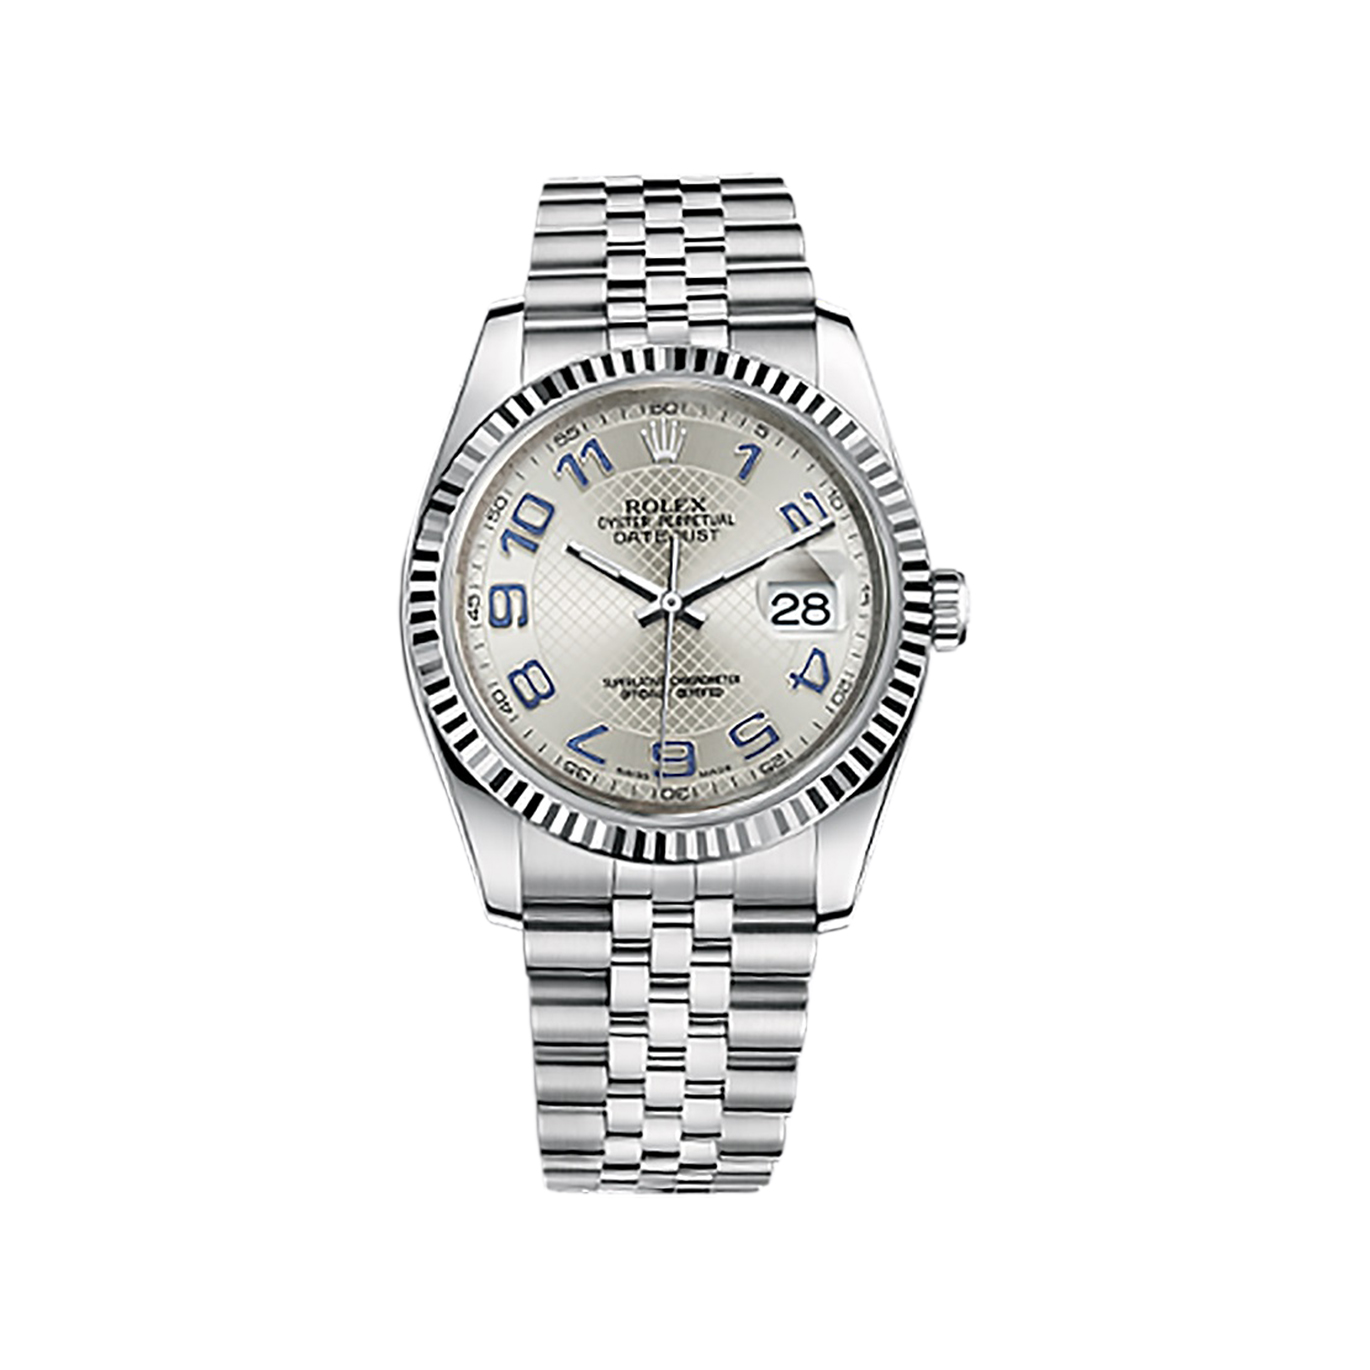 Datejust 36 116234 White Gold & Stainless Steel Watch (Silver)